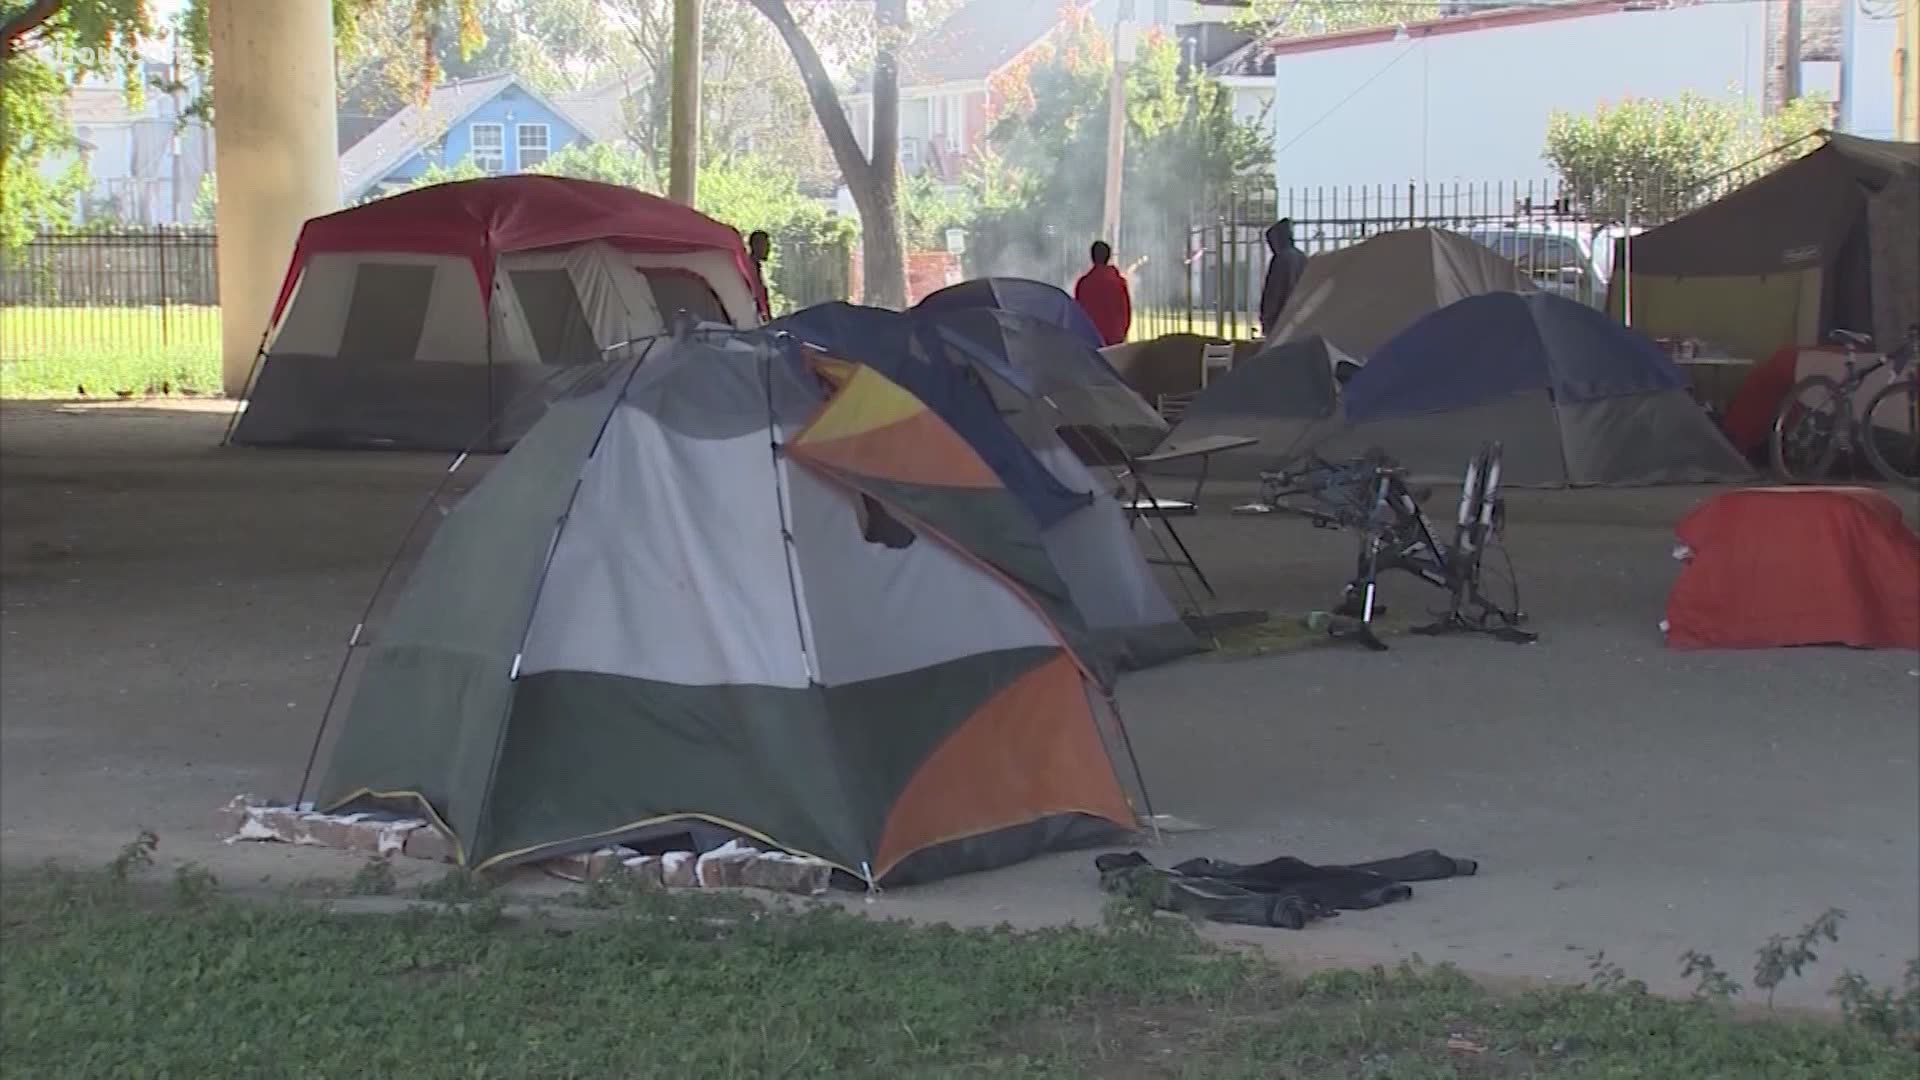 Harris County and the City of Houston on Tuesday launched a $56 million plan to address homelessness.